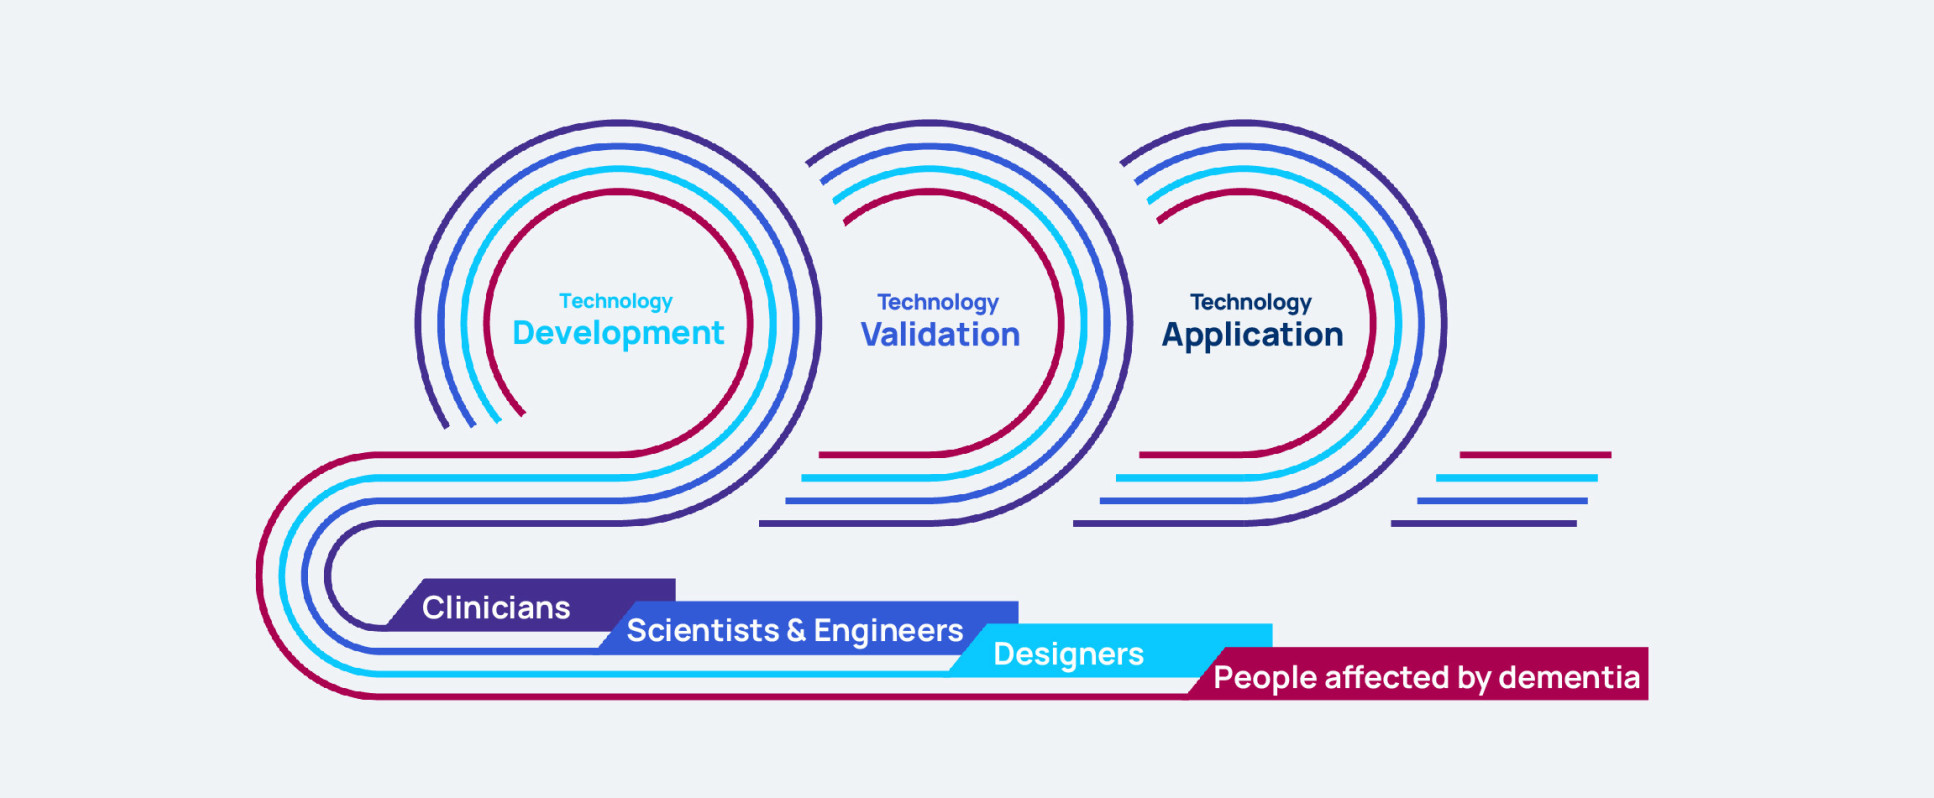 Graphic showing technology development, validation, application